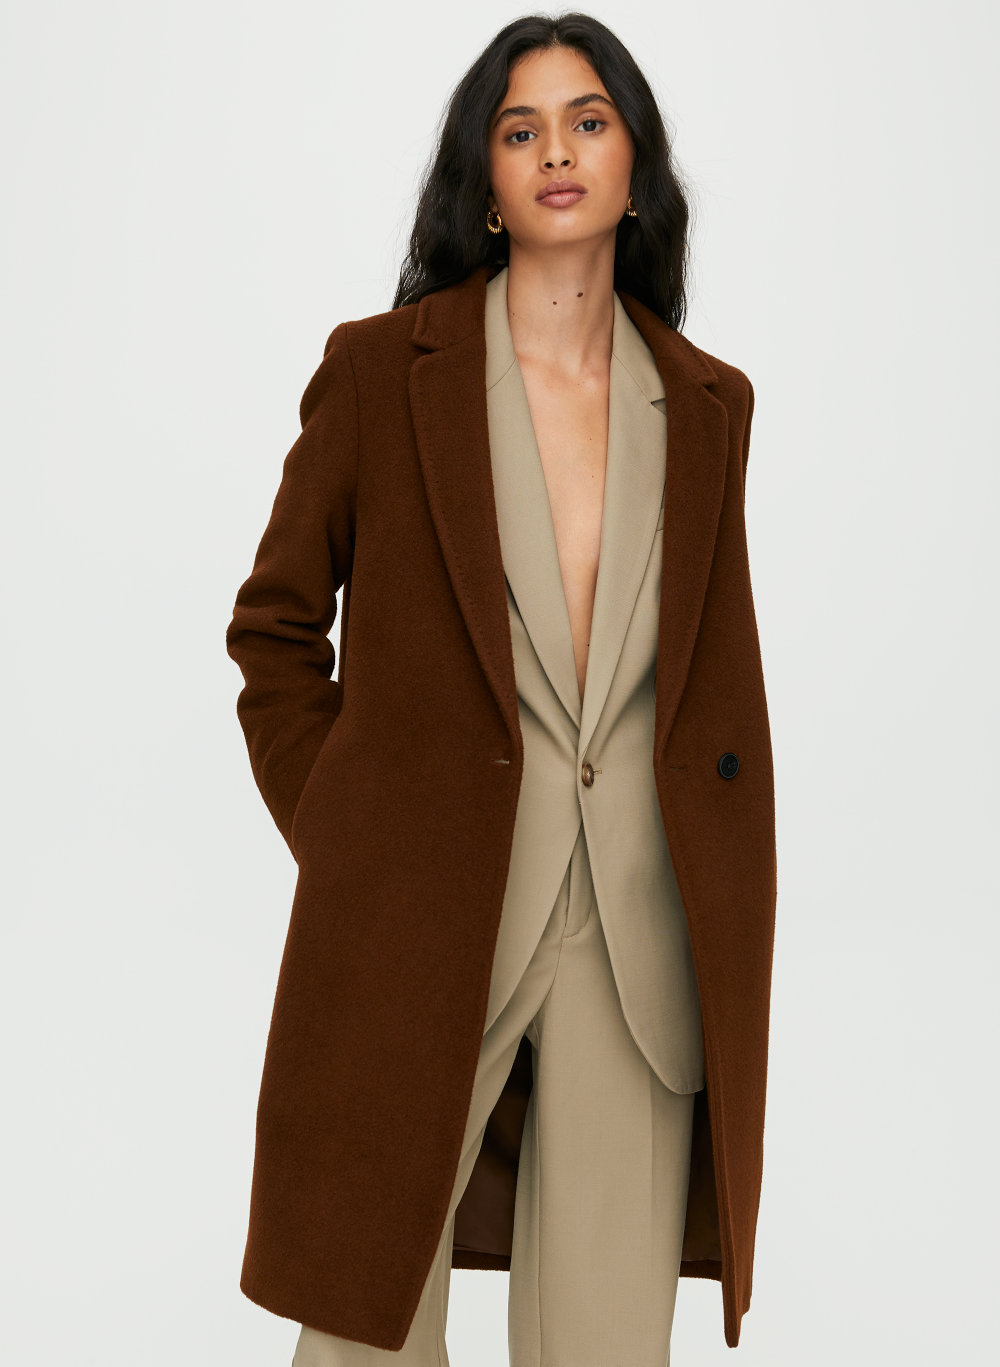 What Is A Camel Hair Coat Made Out Of - It should come as no surprise ...